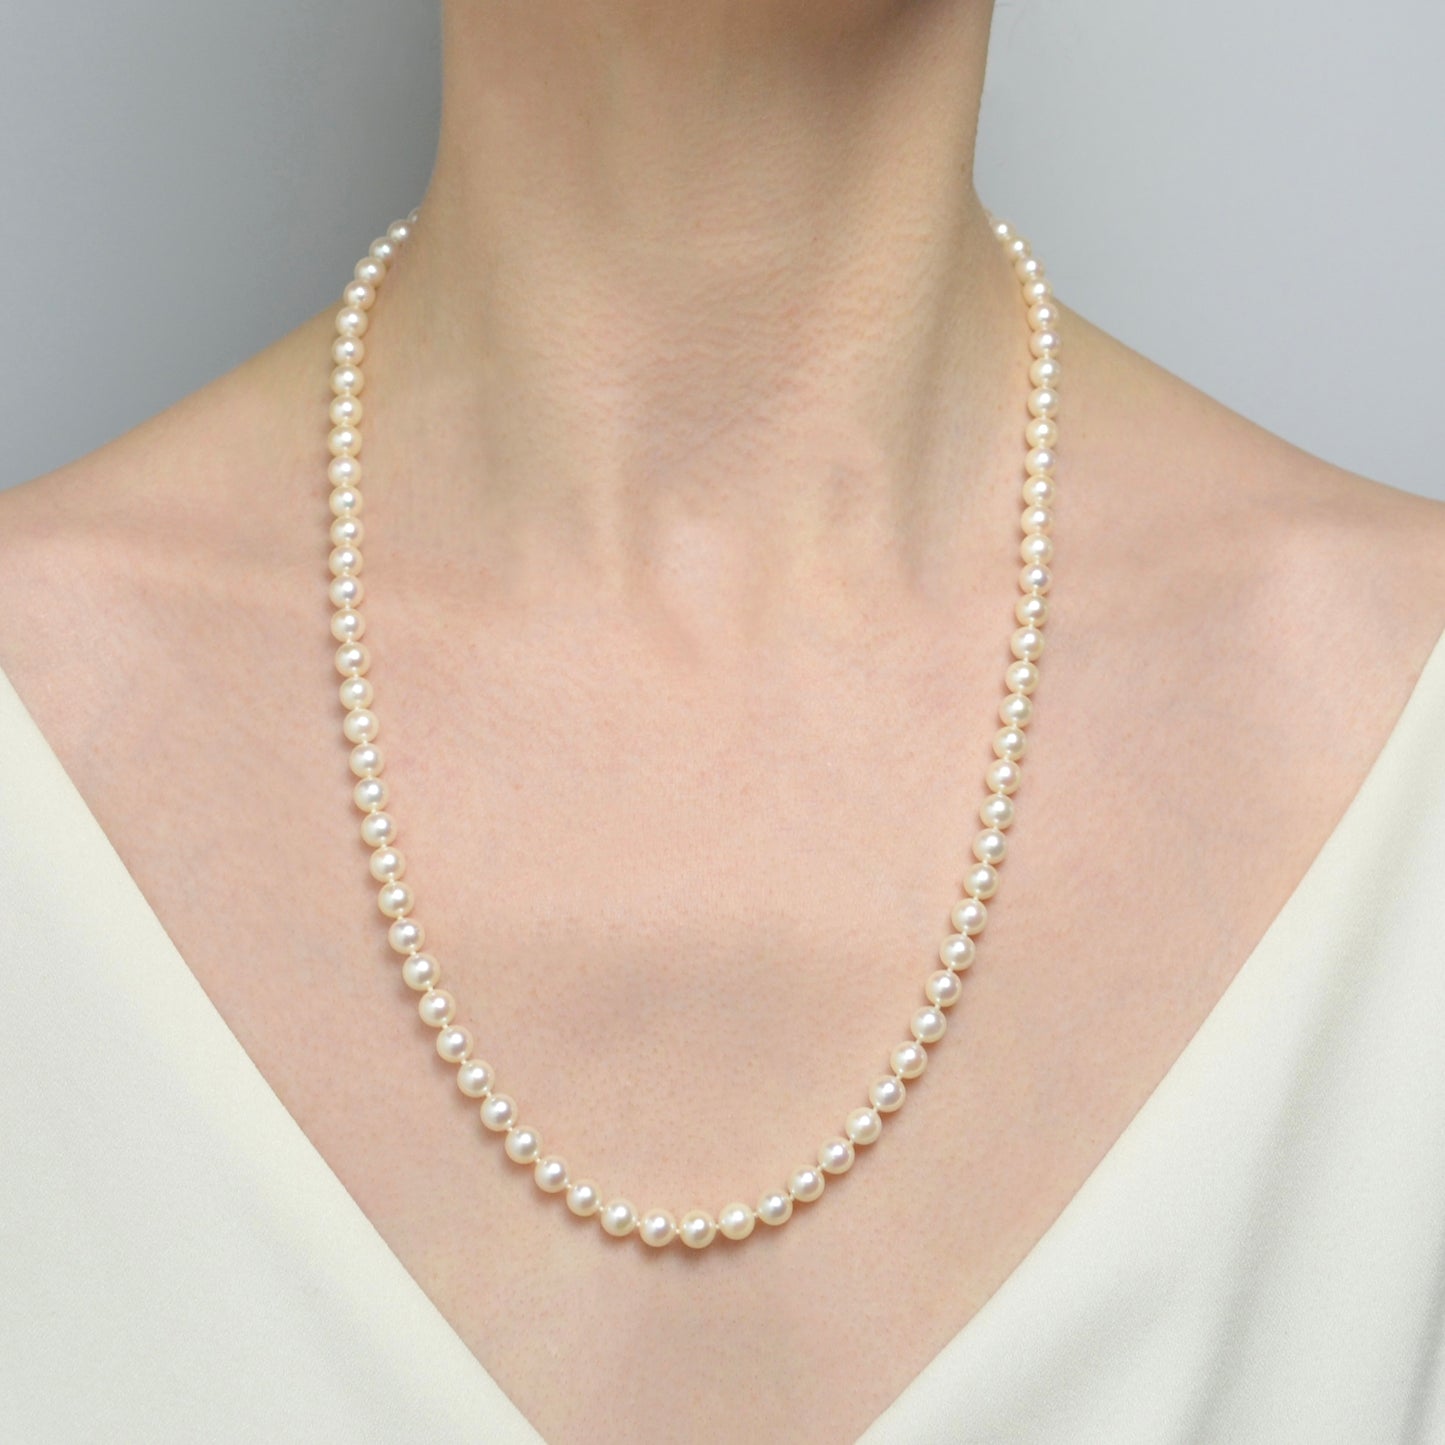 Matinee Pearl Necklace